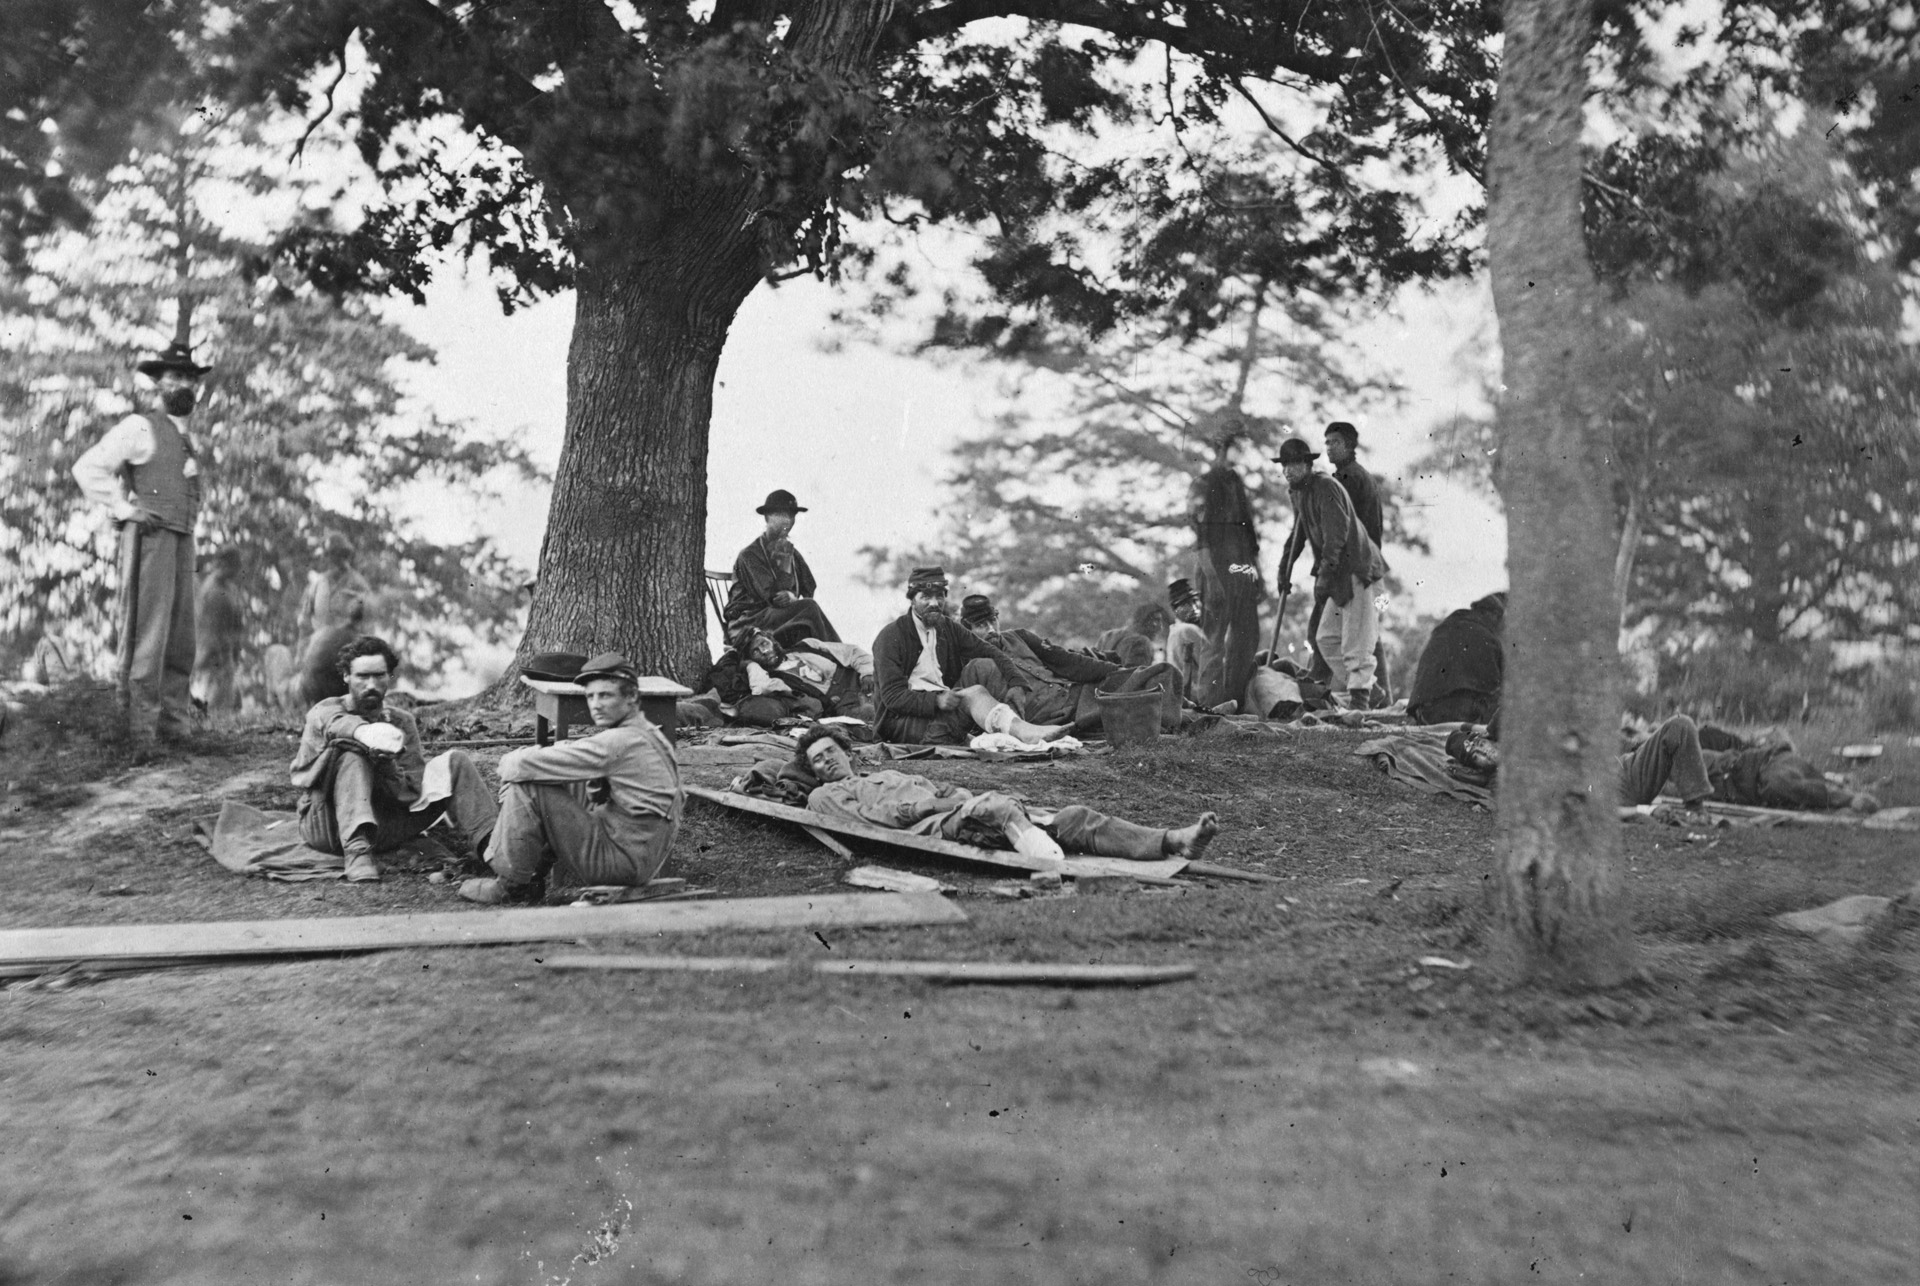 Wounded soldiers on the grass outside a field at Fredericksburg, Virginia. Many of the wounded would end up in hospitals in Washington, where they either recuperated or died.